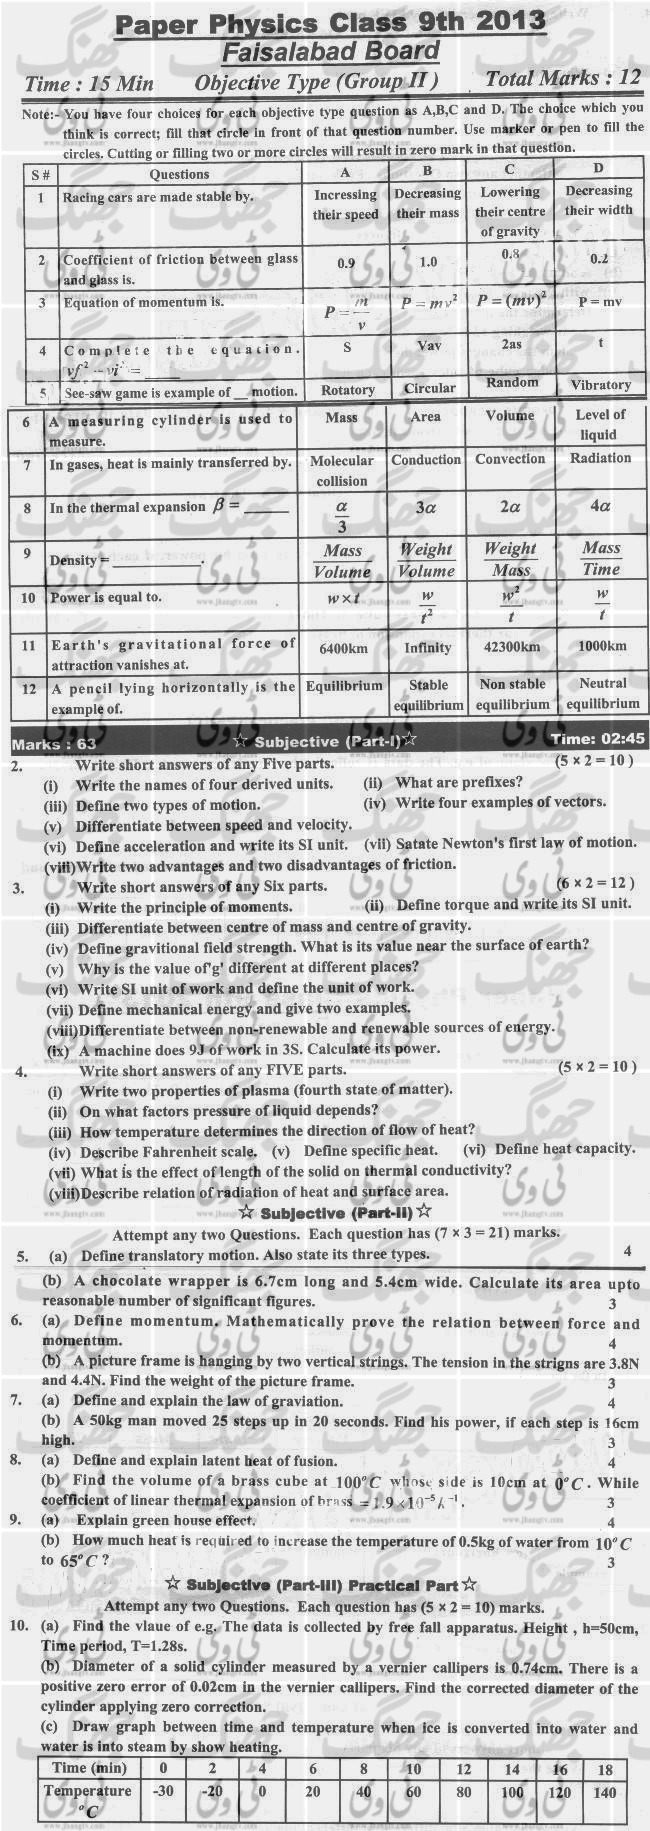 Past-Papers-2013-Faisalabad-Board-9th-Class-Physics-Group-2-English-Version copy